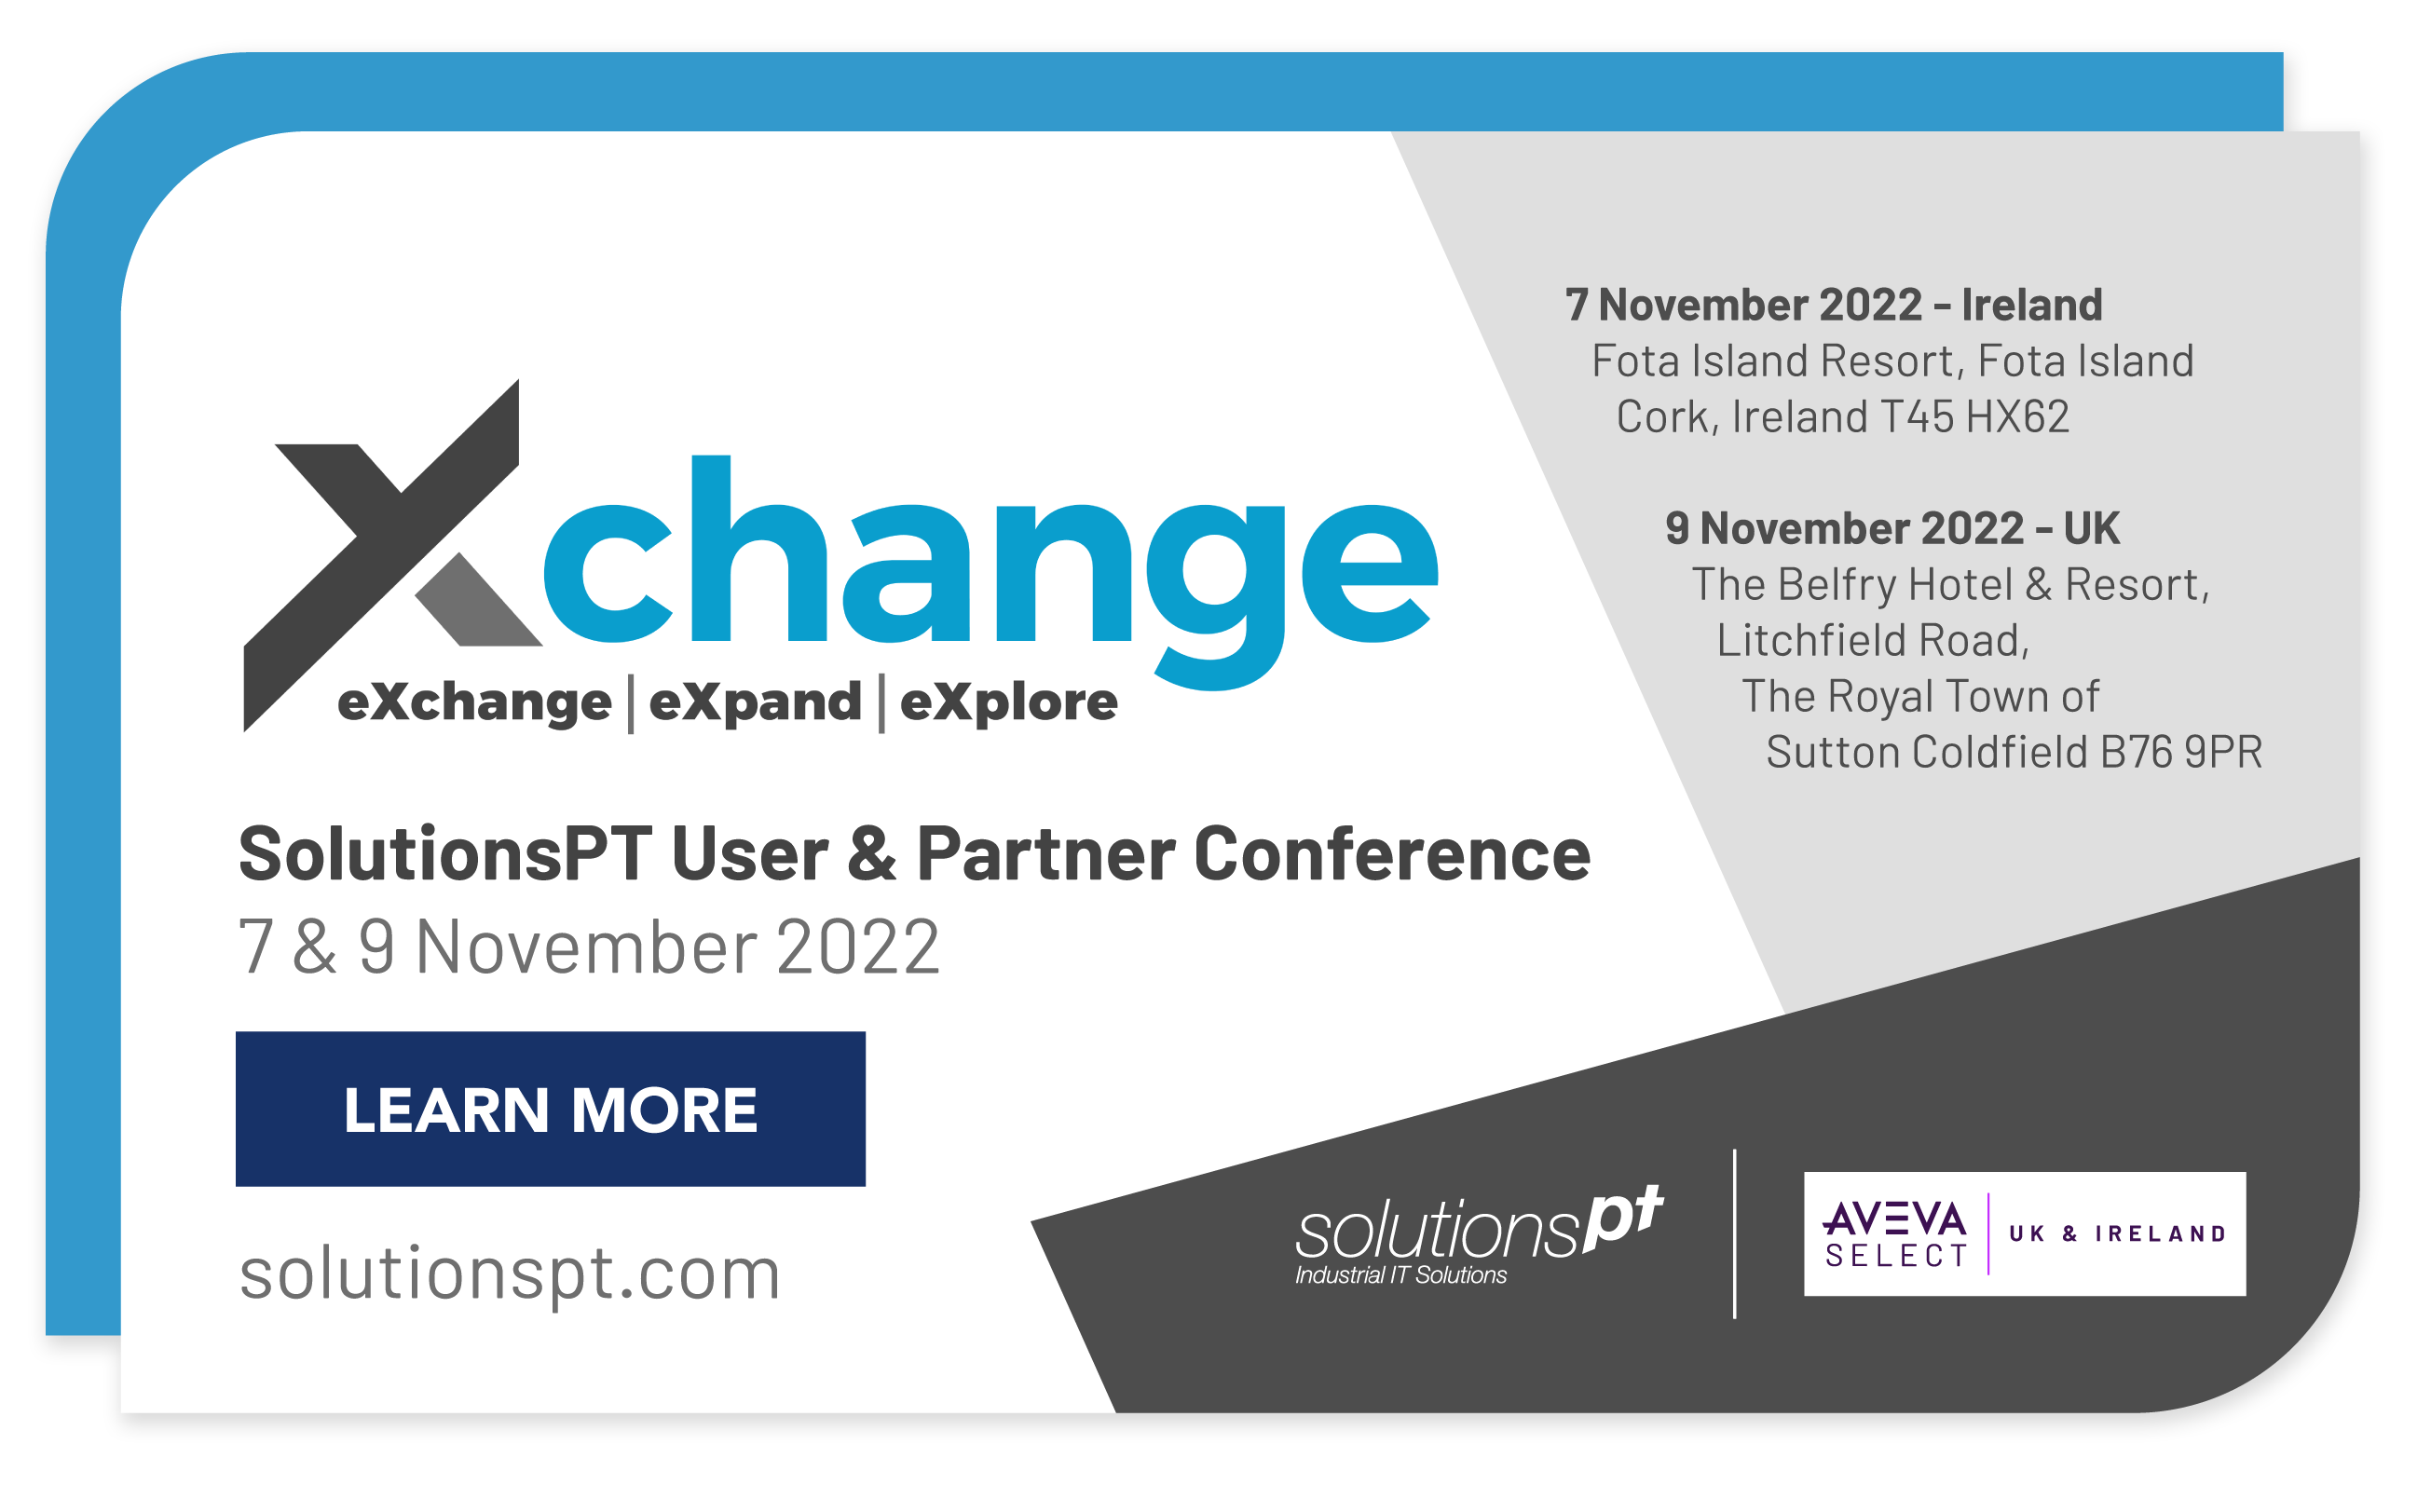 xchnage conference 2022 